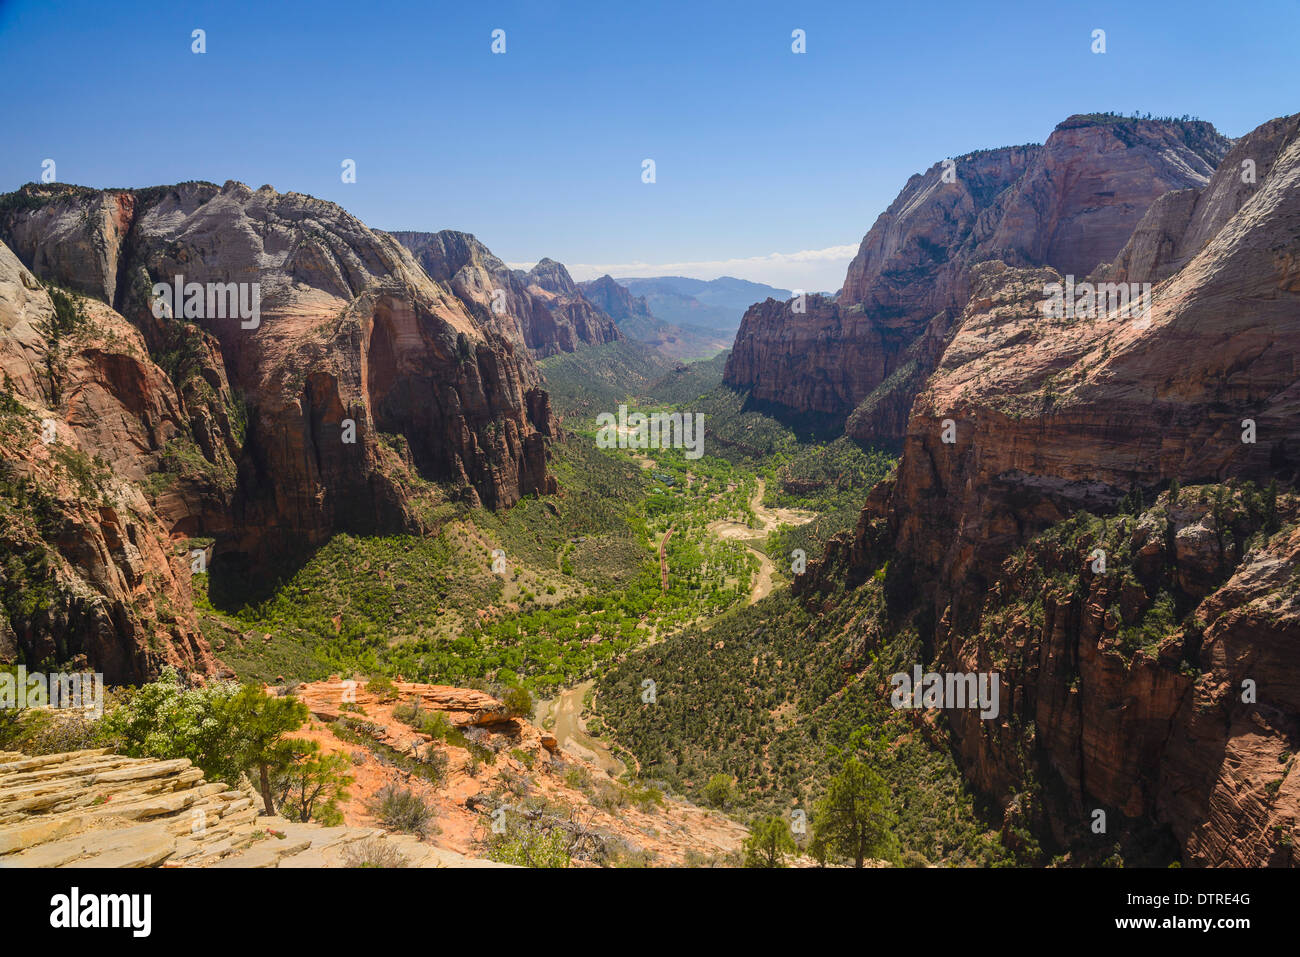 View of Zion Canyon from Angels Landing, Zion National Park, Utah, USA Stock Photo